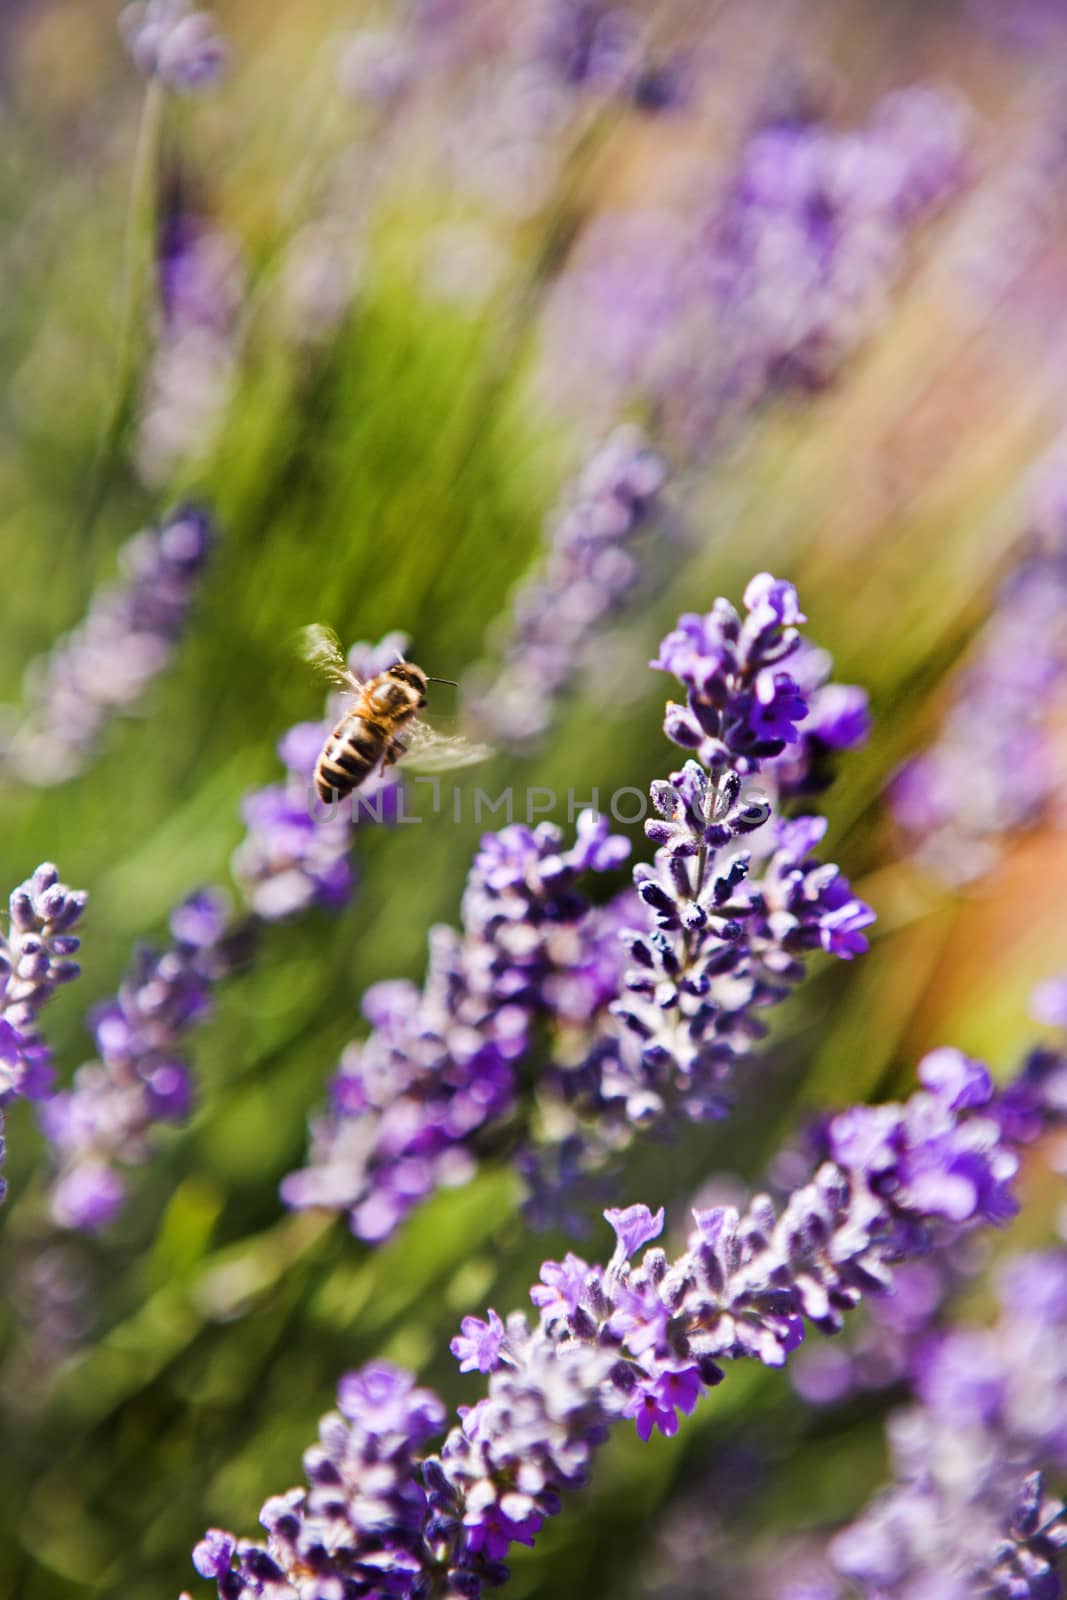 Honey bee on a lavender bush by jrstock